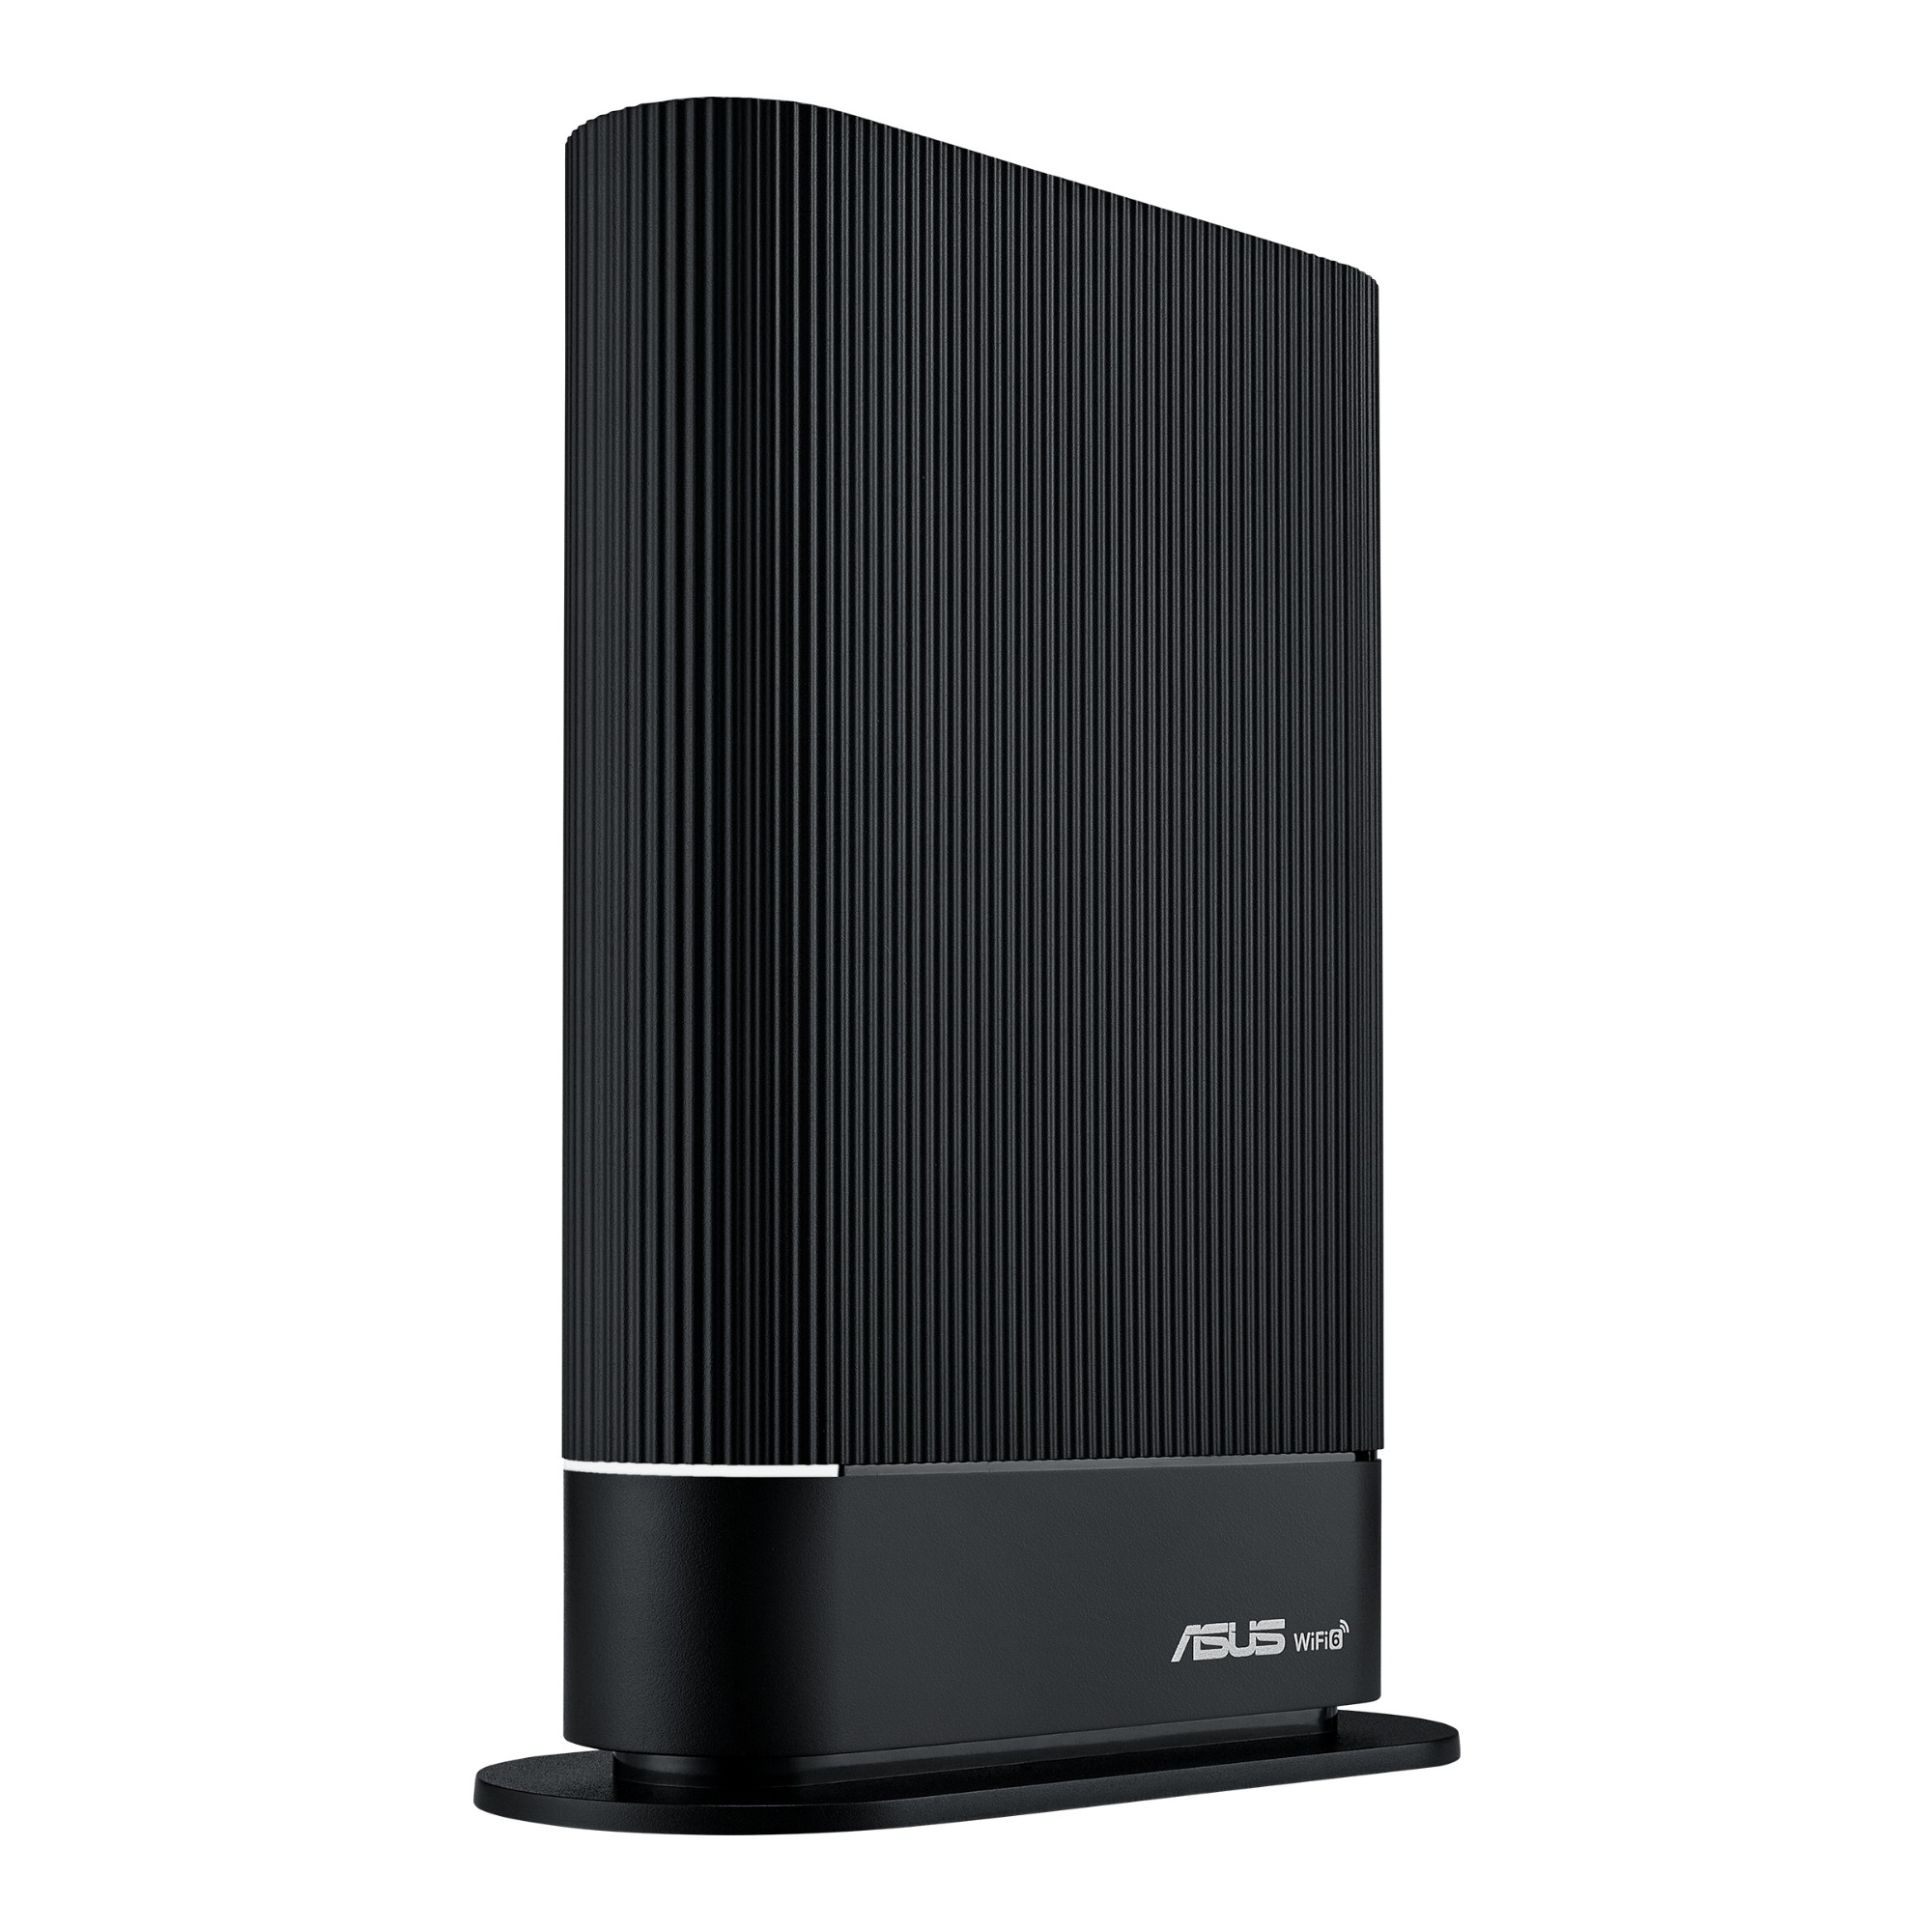 ASUS RT-AX59U wireless router Gigabit Ethernet Dual-band (2.4 GHz / 5 GHz) Black